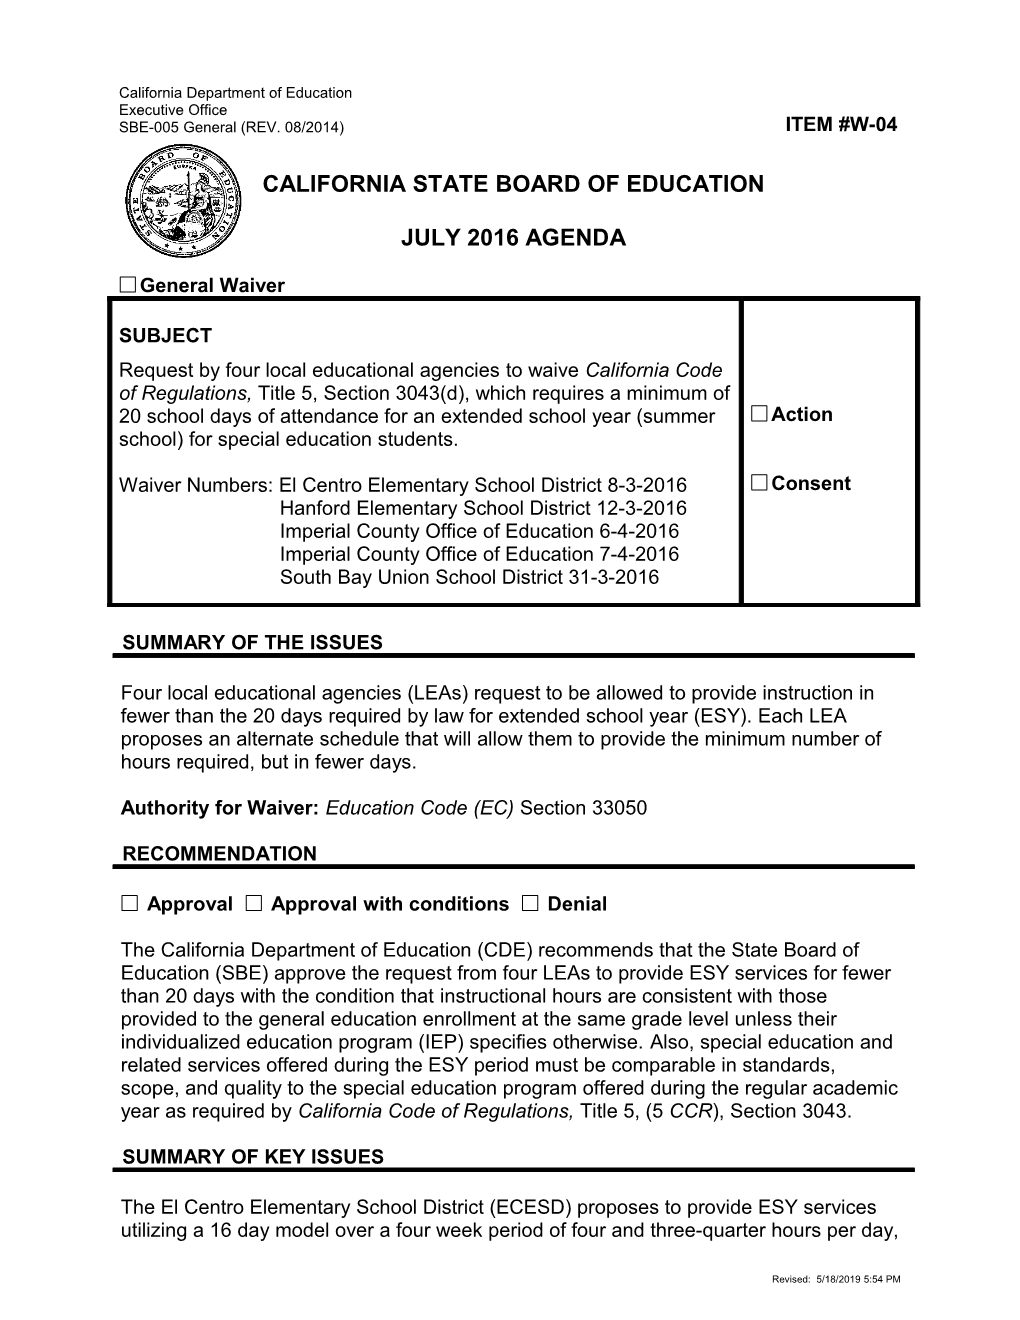 July 2016 Waiver Item W-04 - Meeting Agendas (CA State Board of Education)